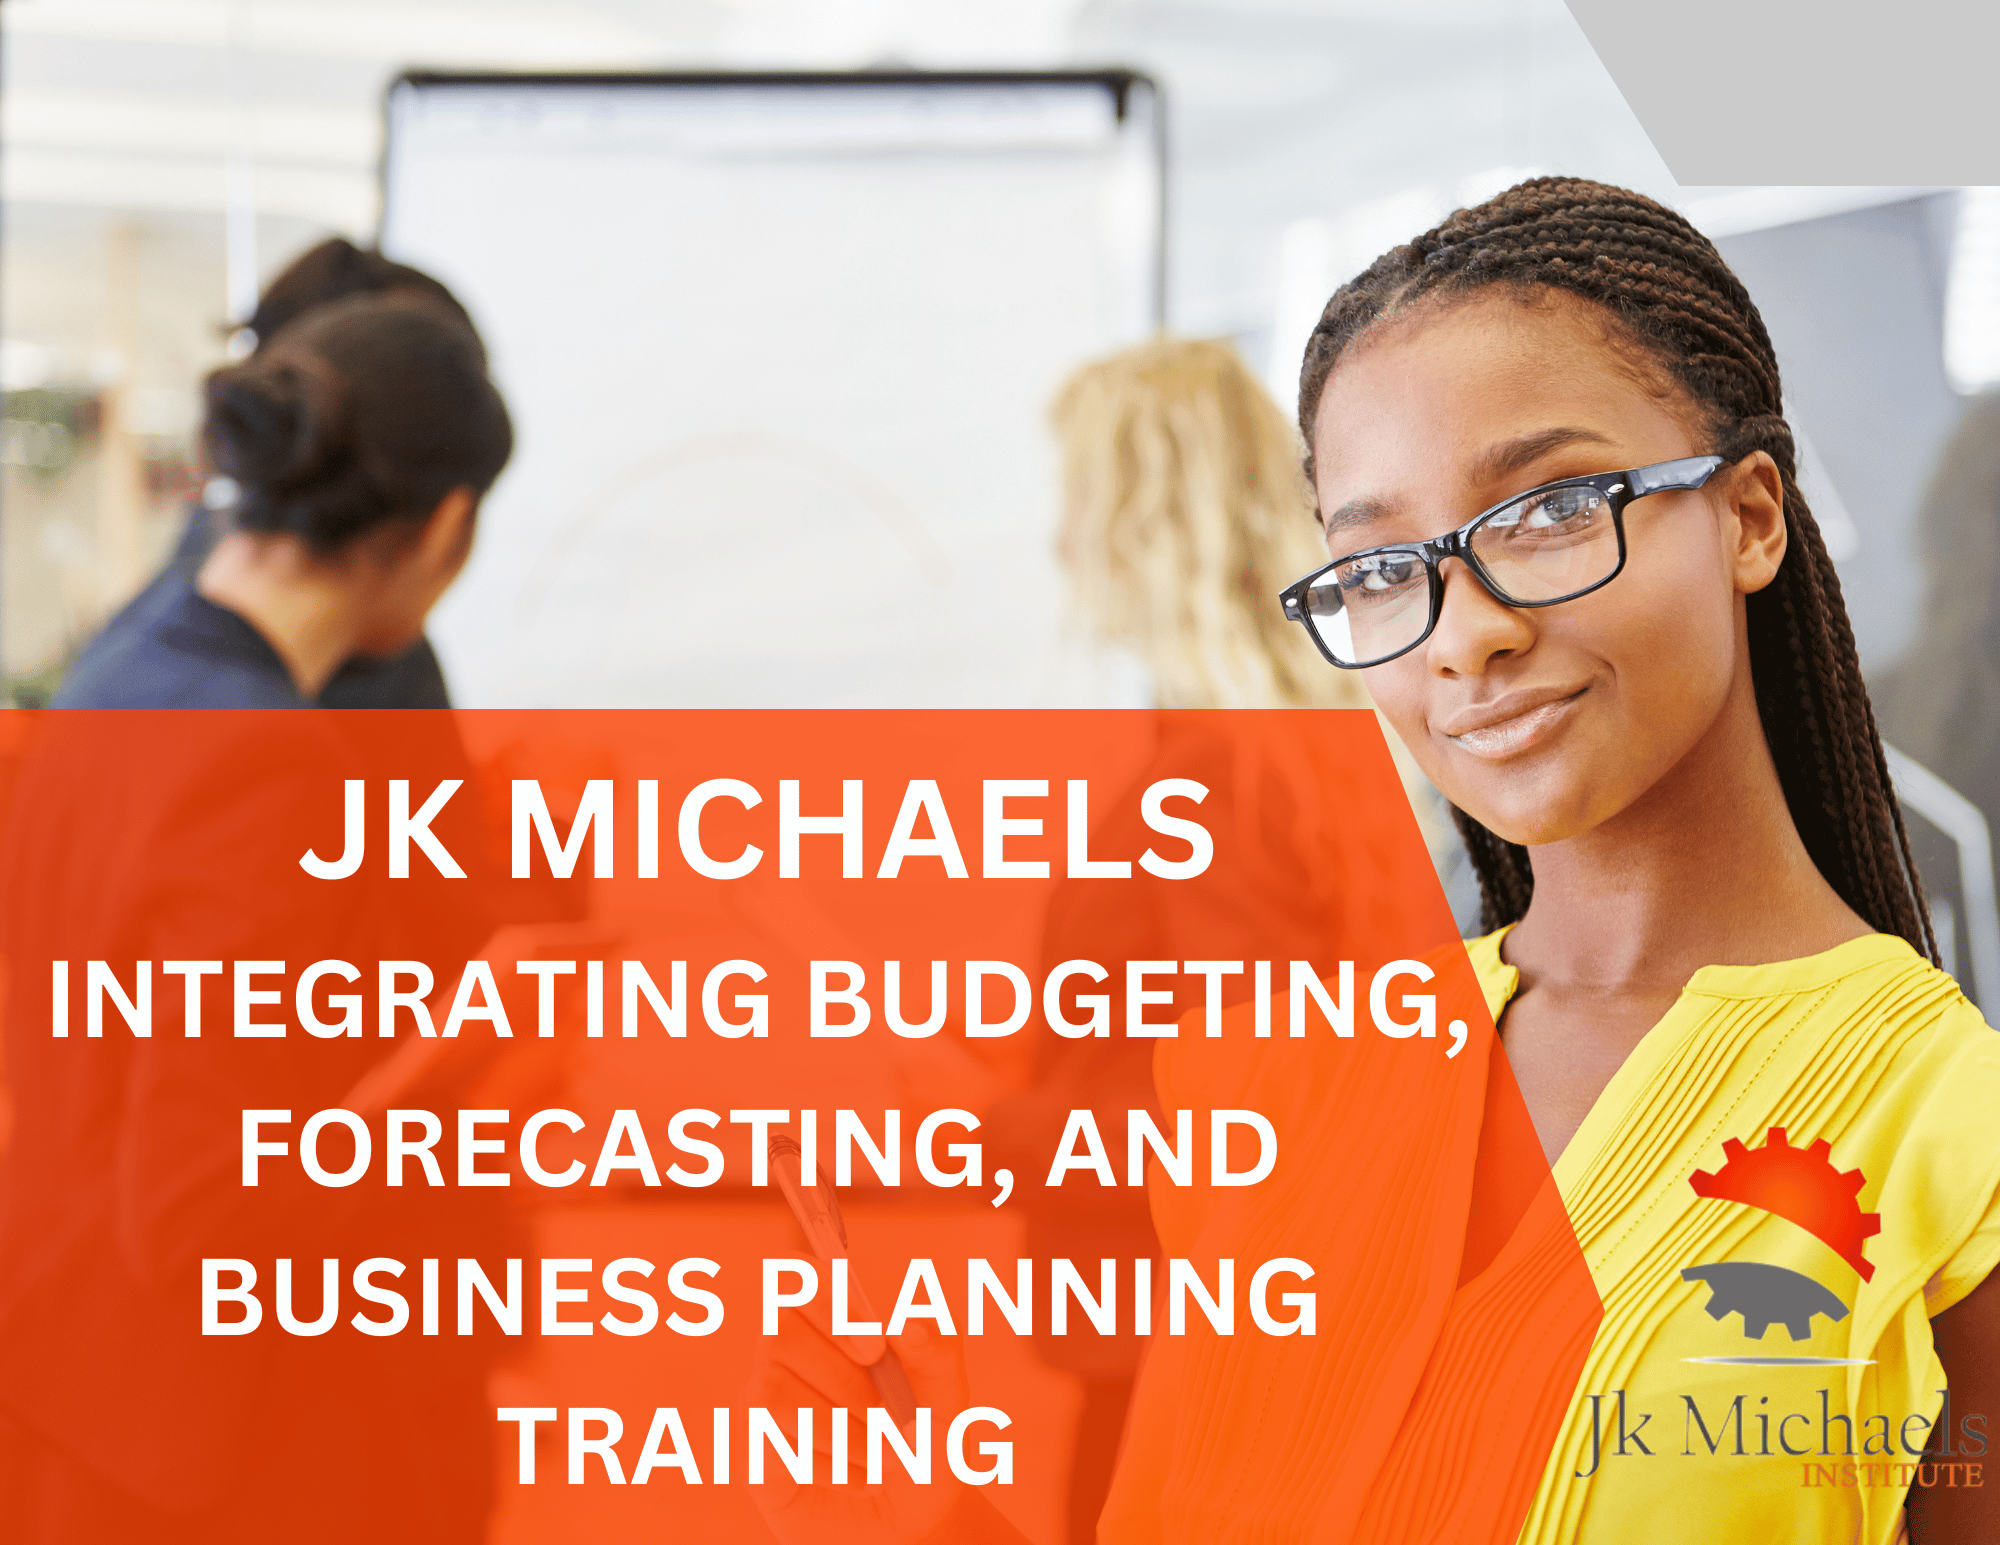 INTEGRATING BUDGETING, FORECASTING, AND BUSINESS PLANNING TRAINING